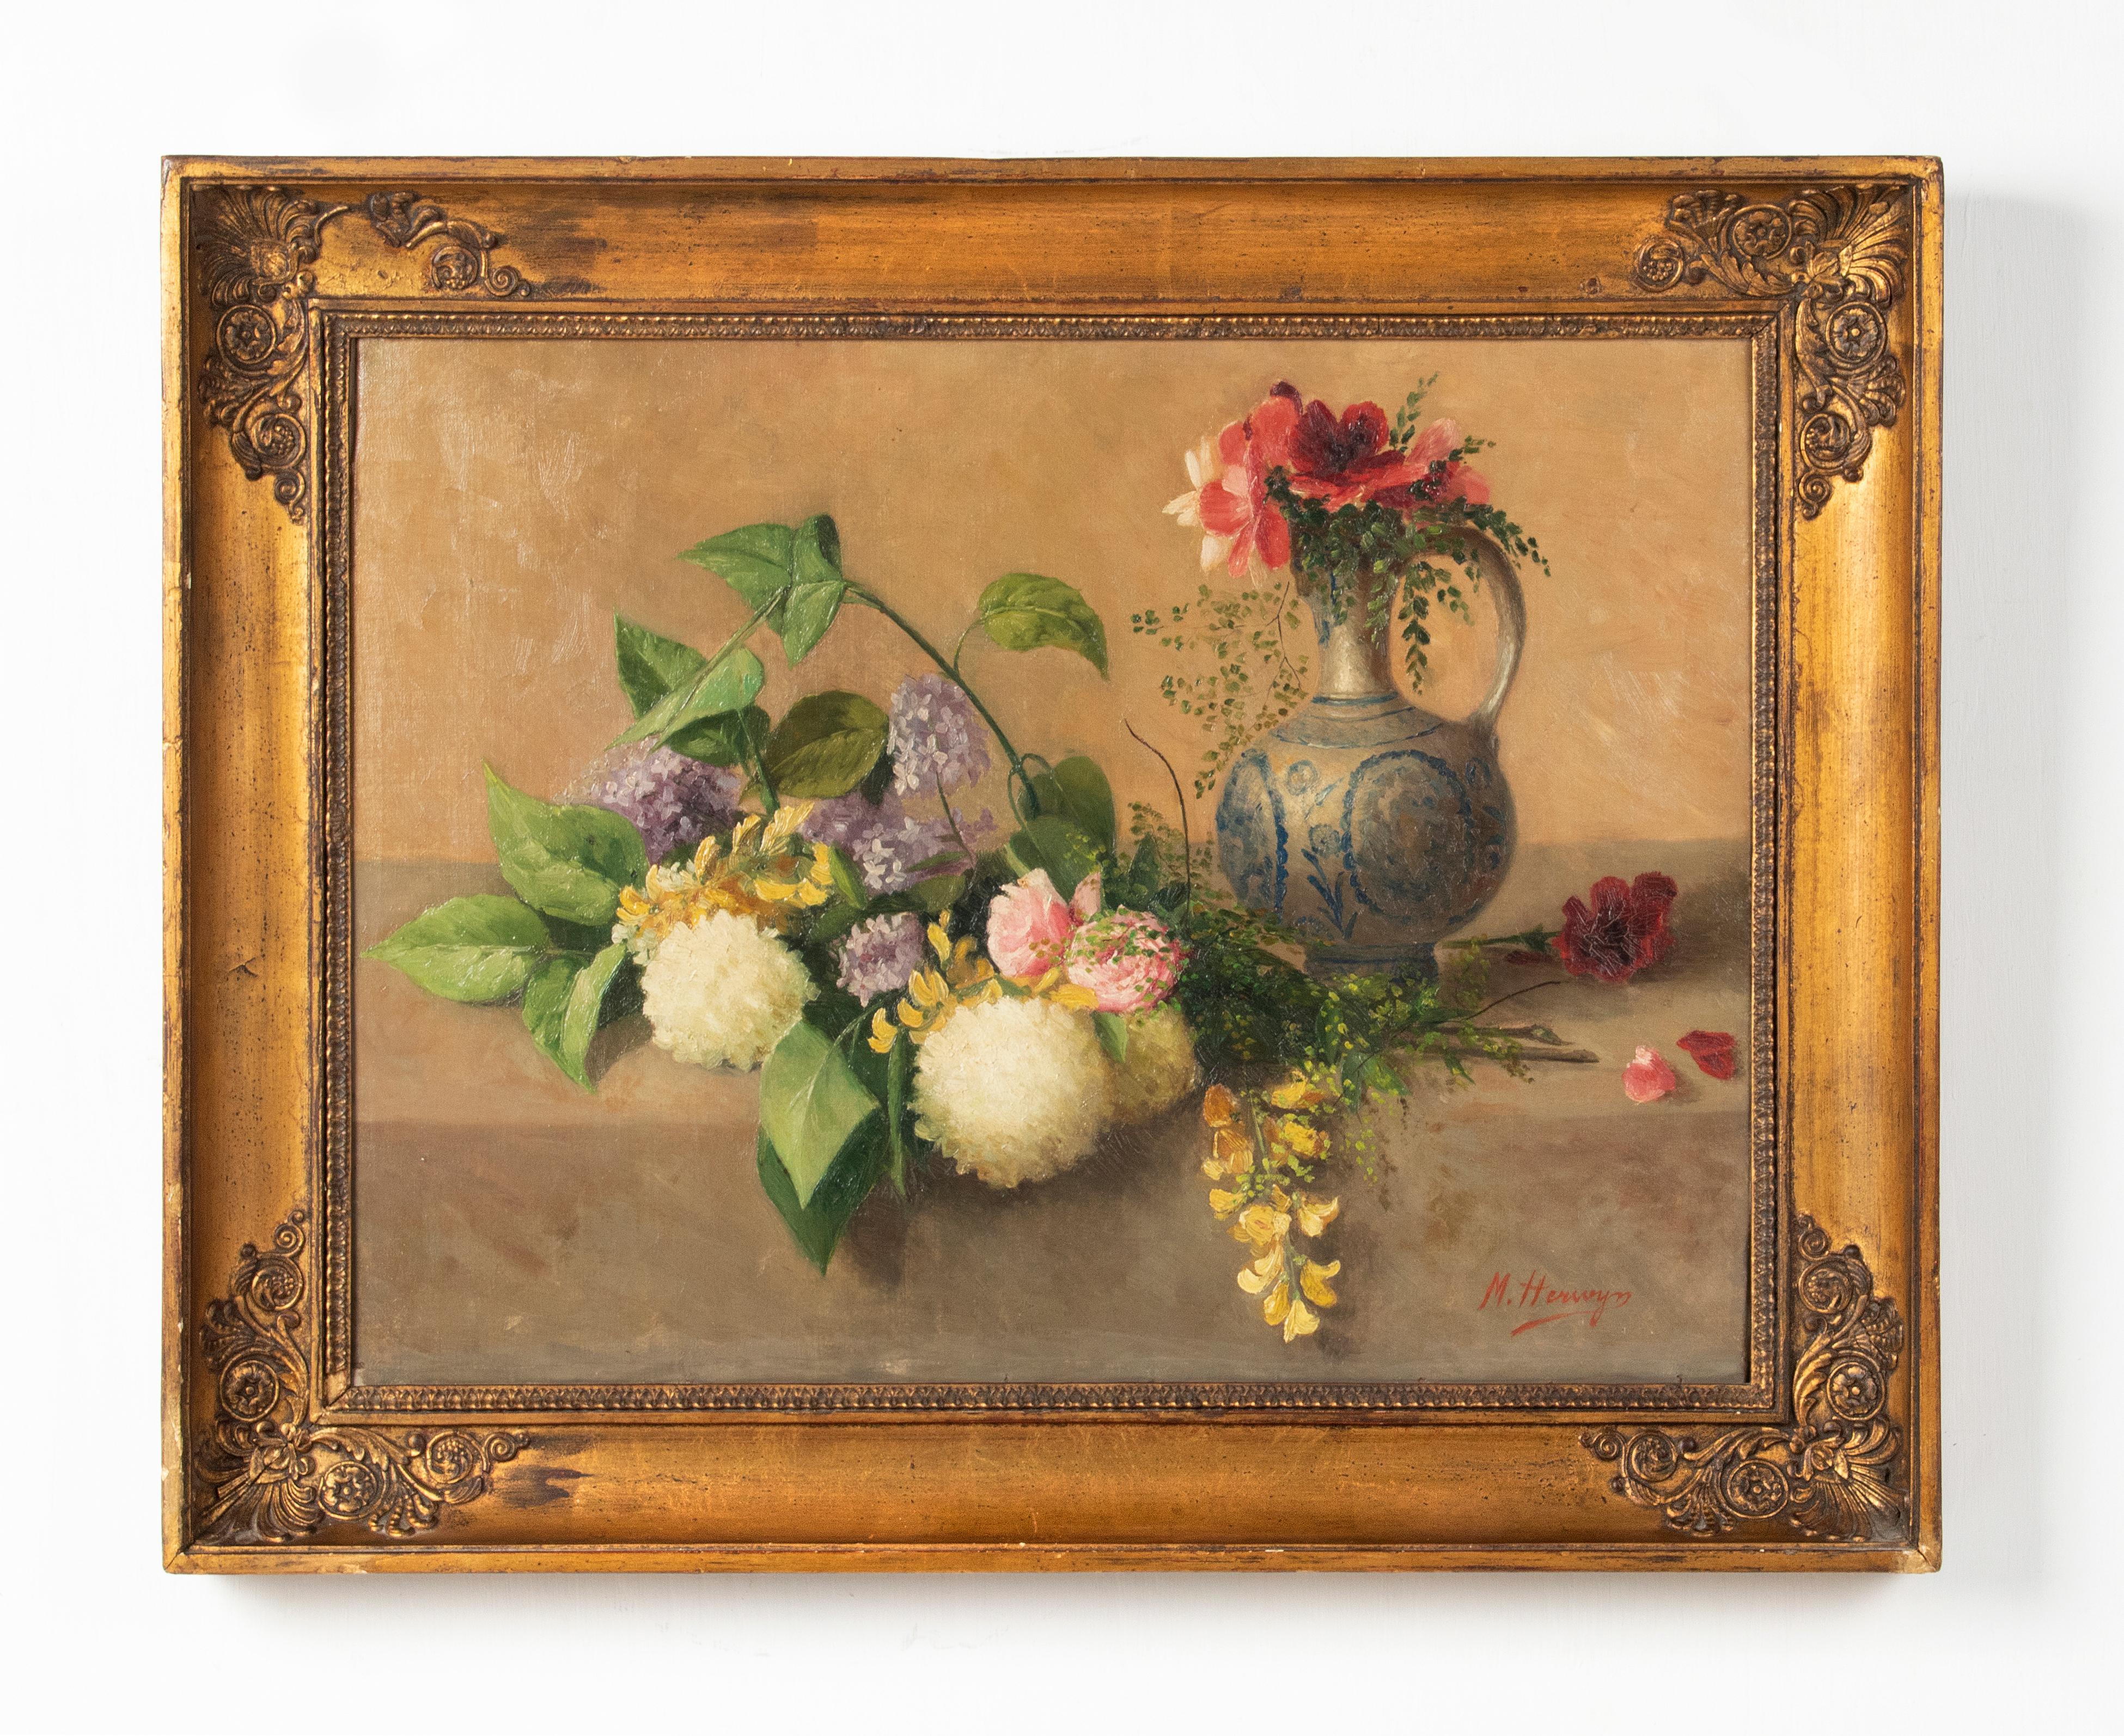 Romantic 19th Century Flower Still Life Painting Oil on Canvas by M. Herwyn